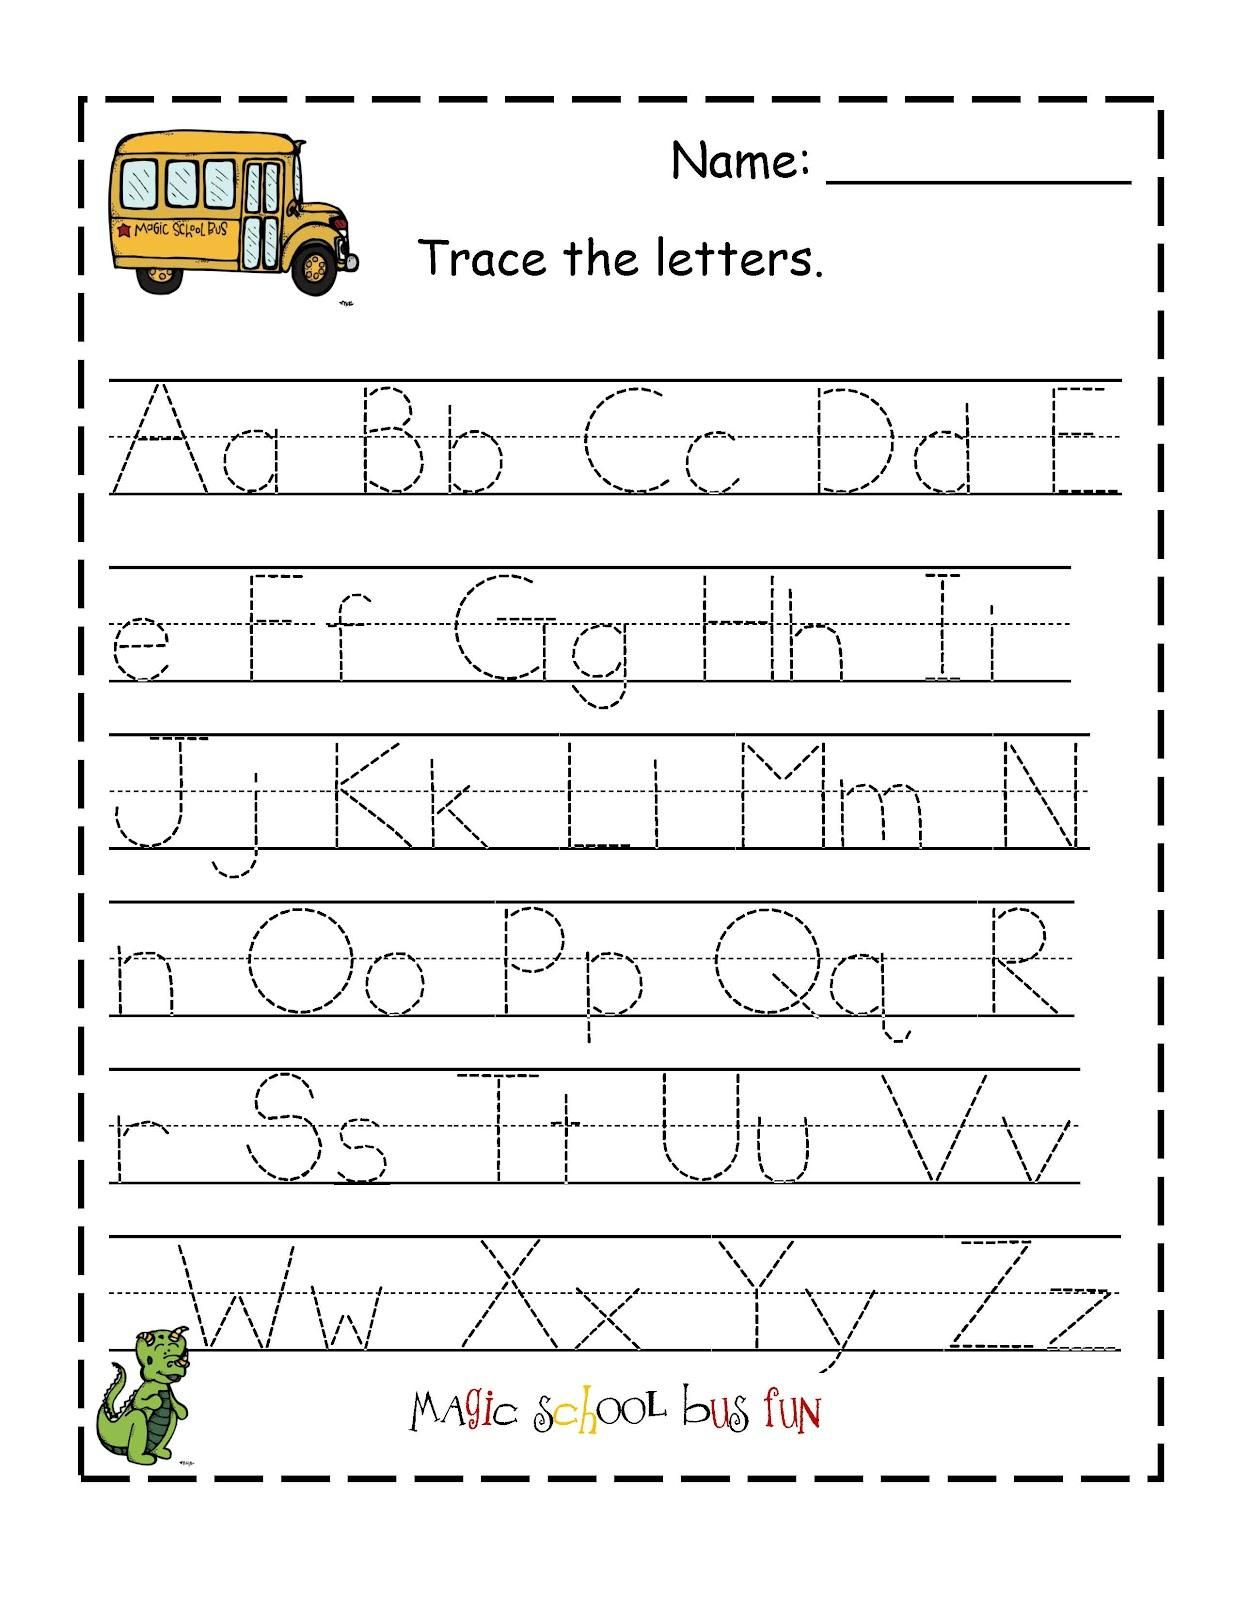 Free Printable Abc Tracing Worksheets #2 | Places To Visit | Free Printable Abc Worksheets